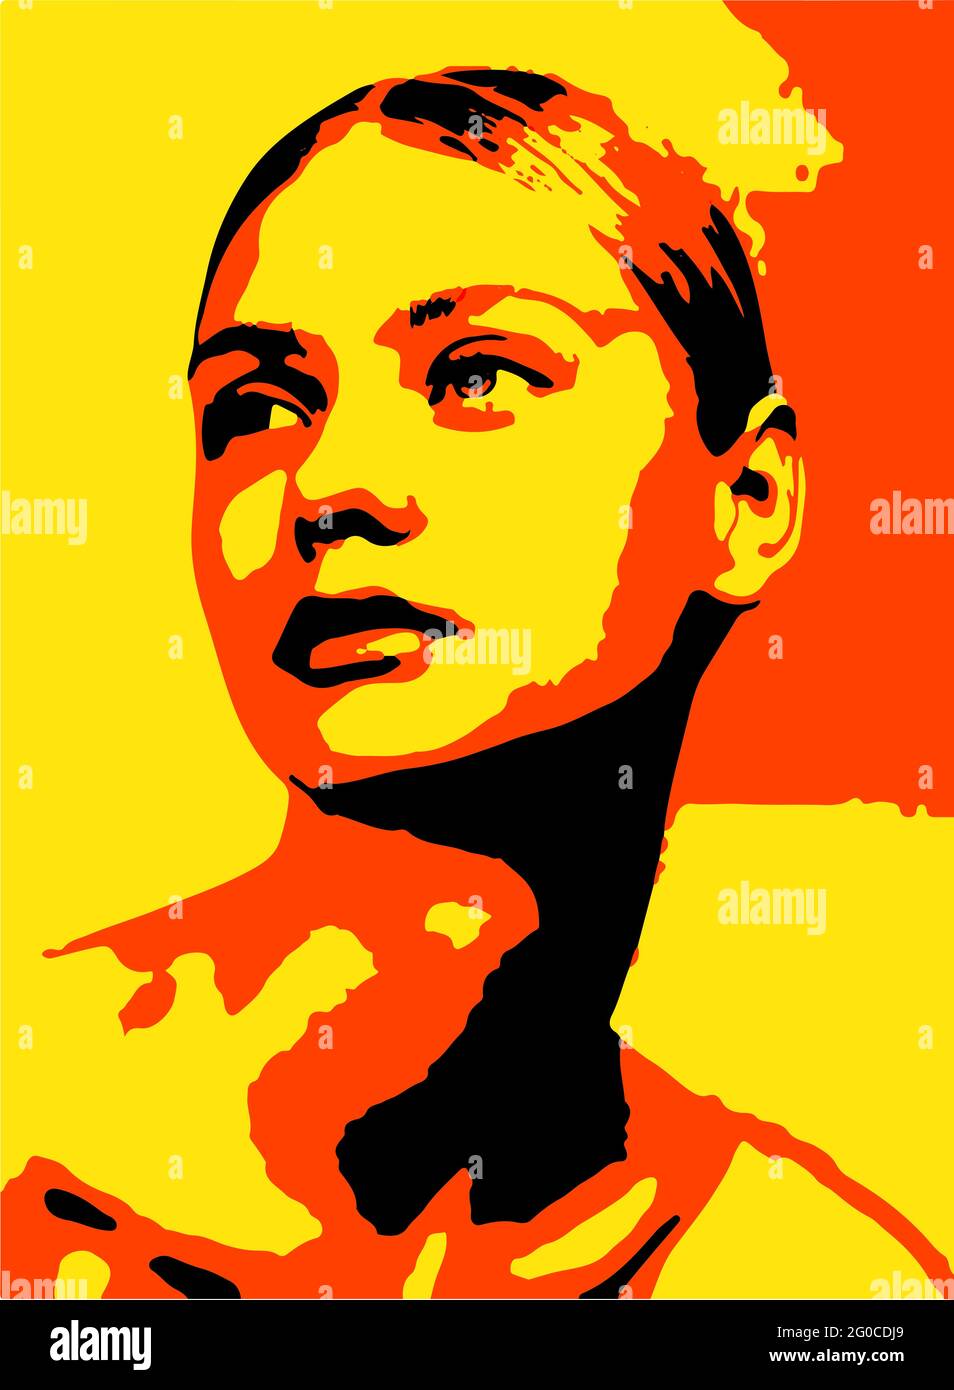 images Alamy - and photography Poster wall hi-res stock